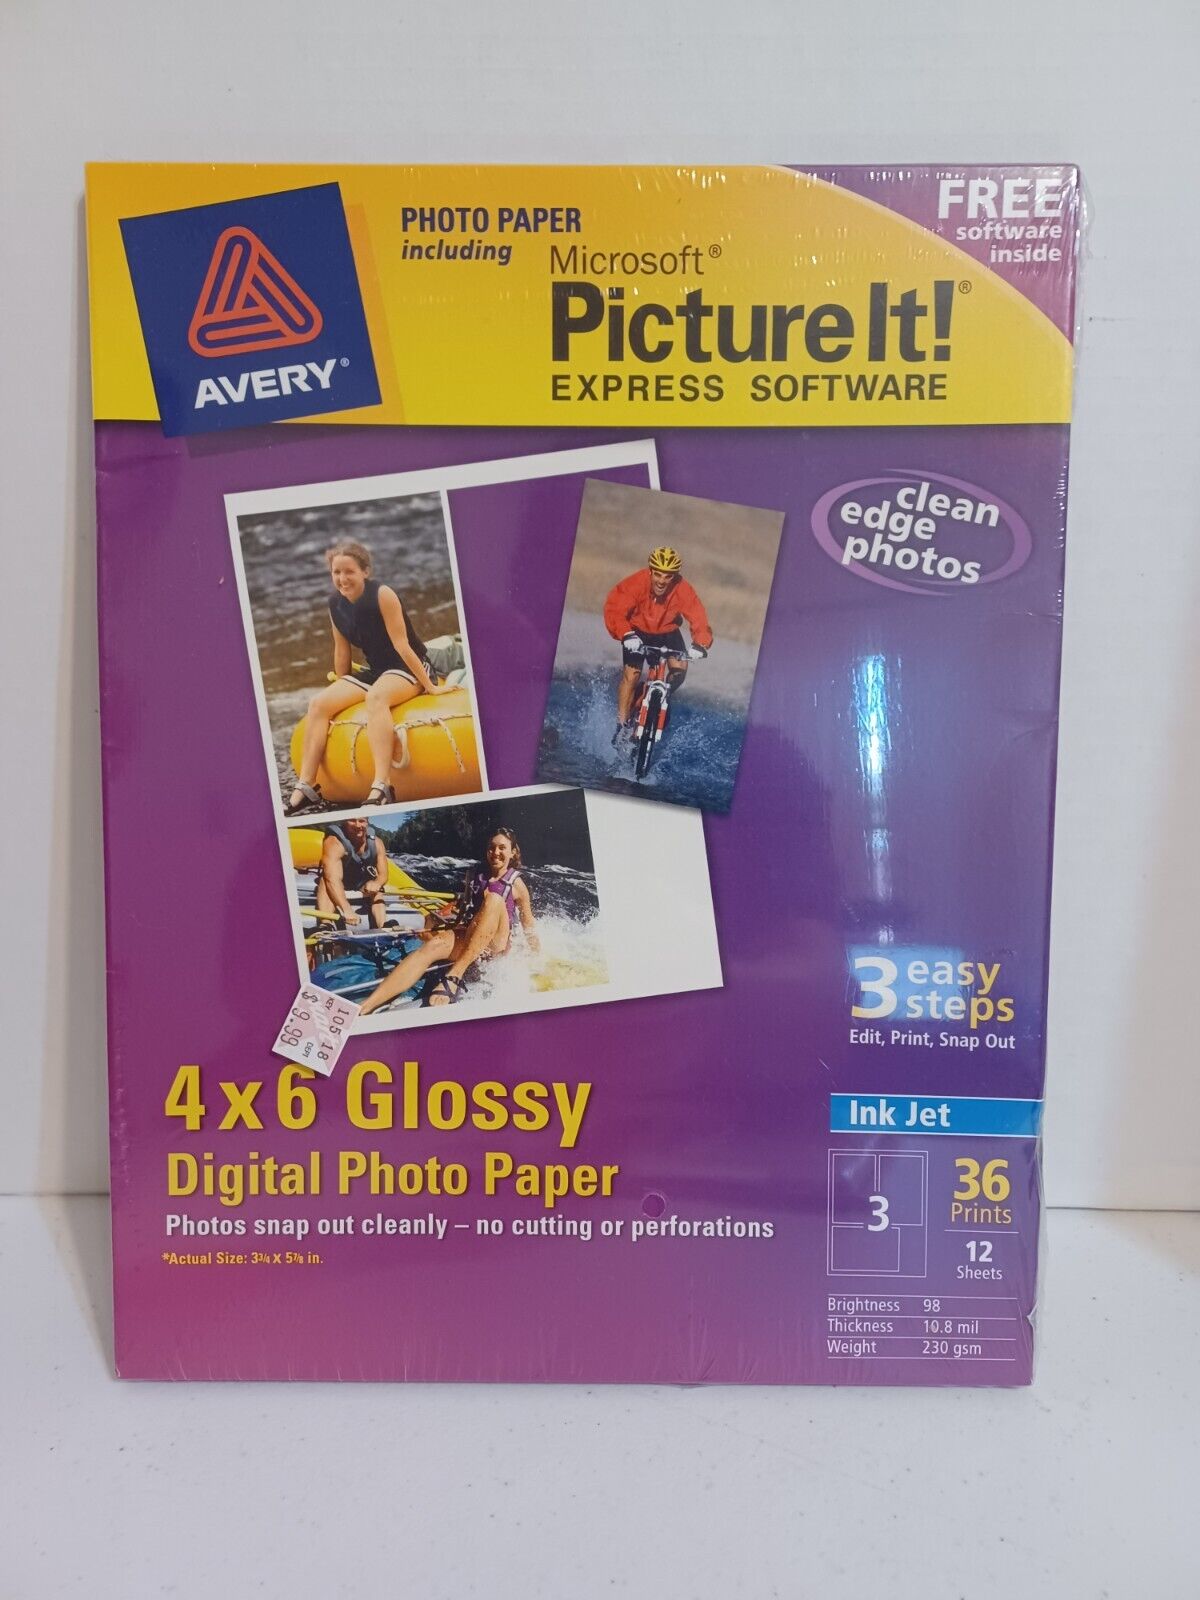 Avery 4x6 Glossy Digital Photo Paper 12 Sheets 36 Prints Software Included NEW